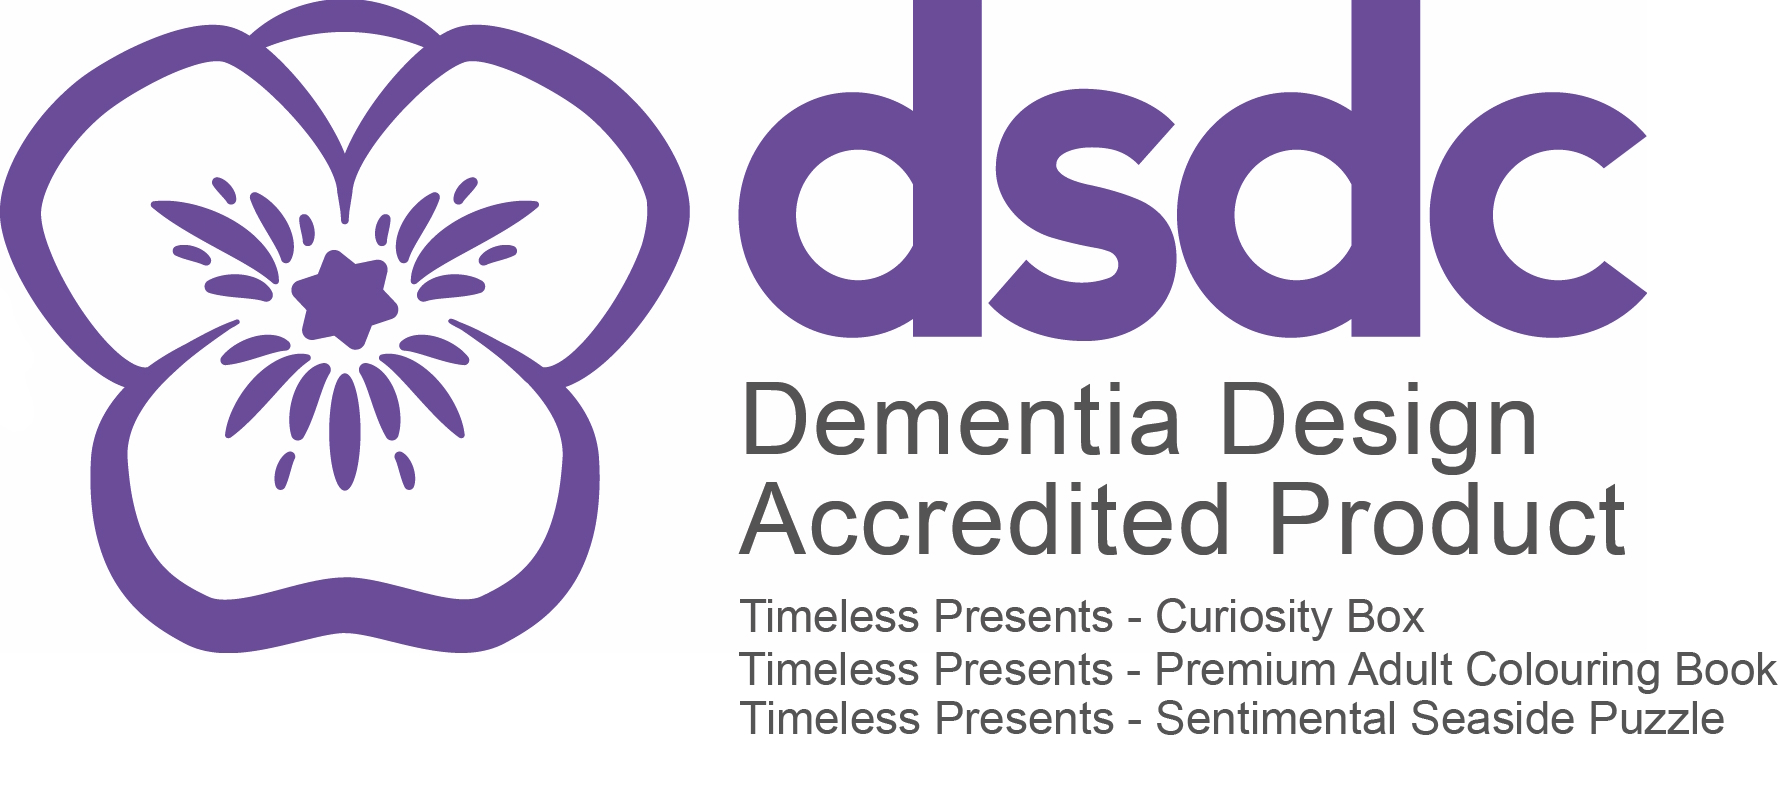 Timeless Presents Announces DSDC Accreditation for Activities that Support Individuals with Dementia and Caregivers 